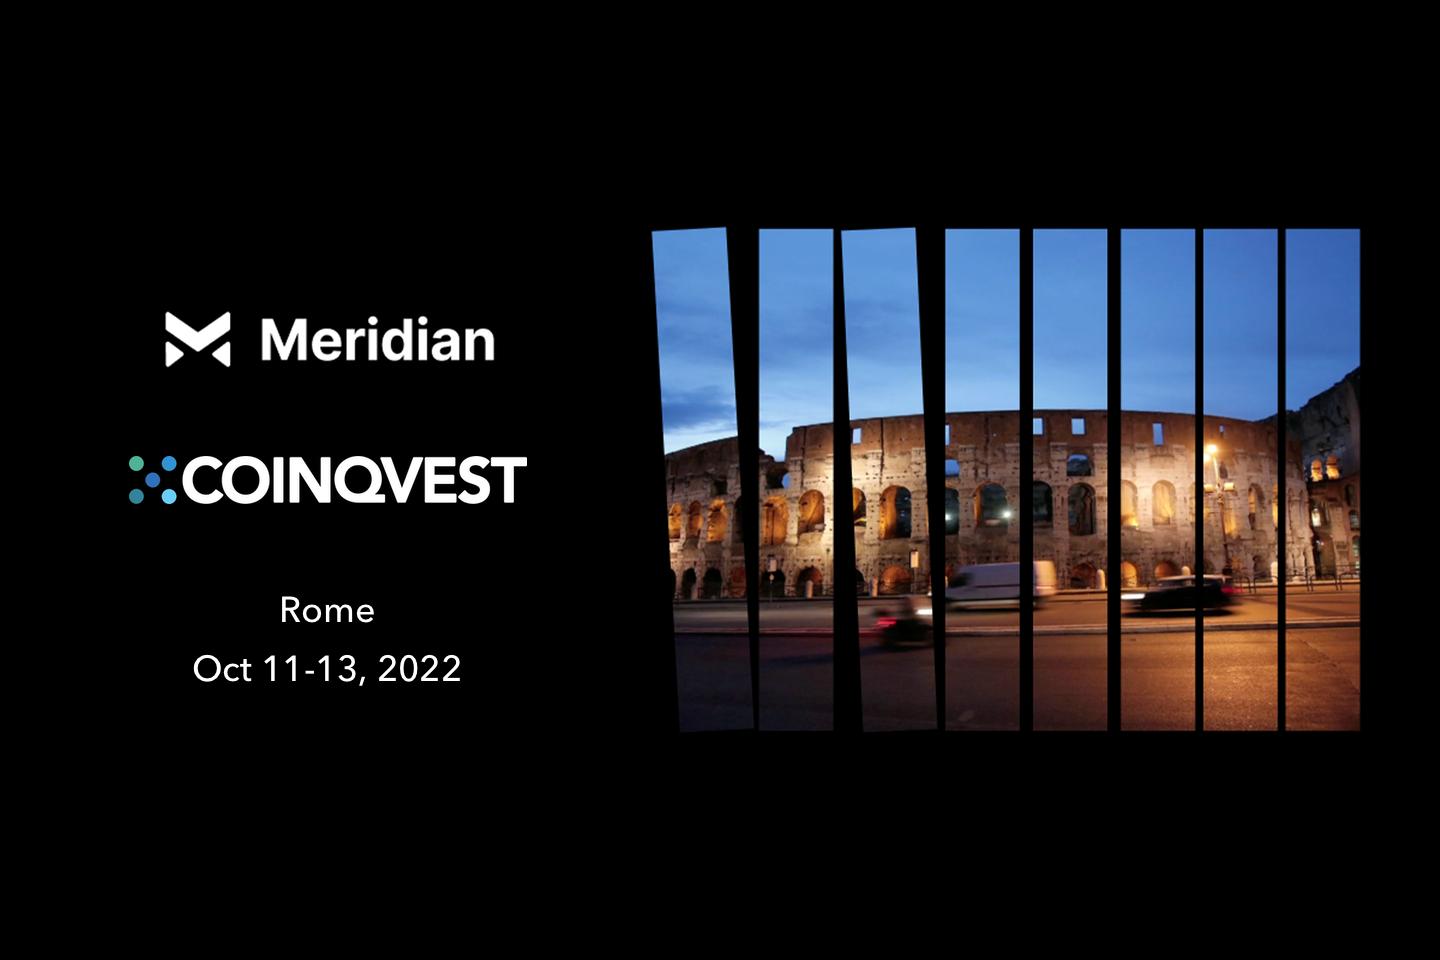 Meet COINQVEST at the Stellar Meridian Event in Rome from Oct 11-13